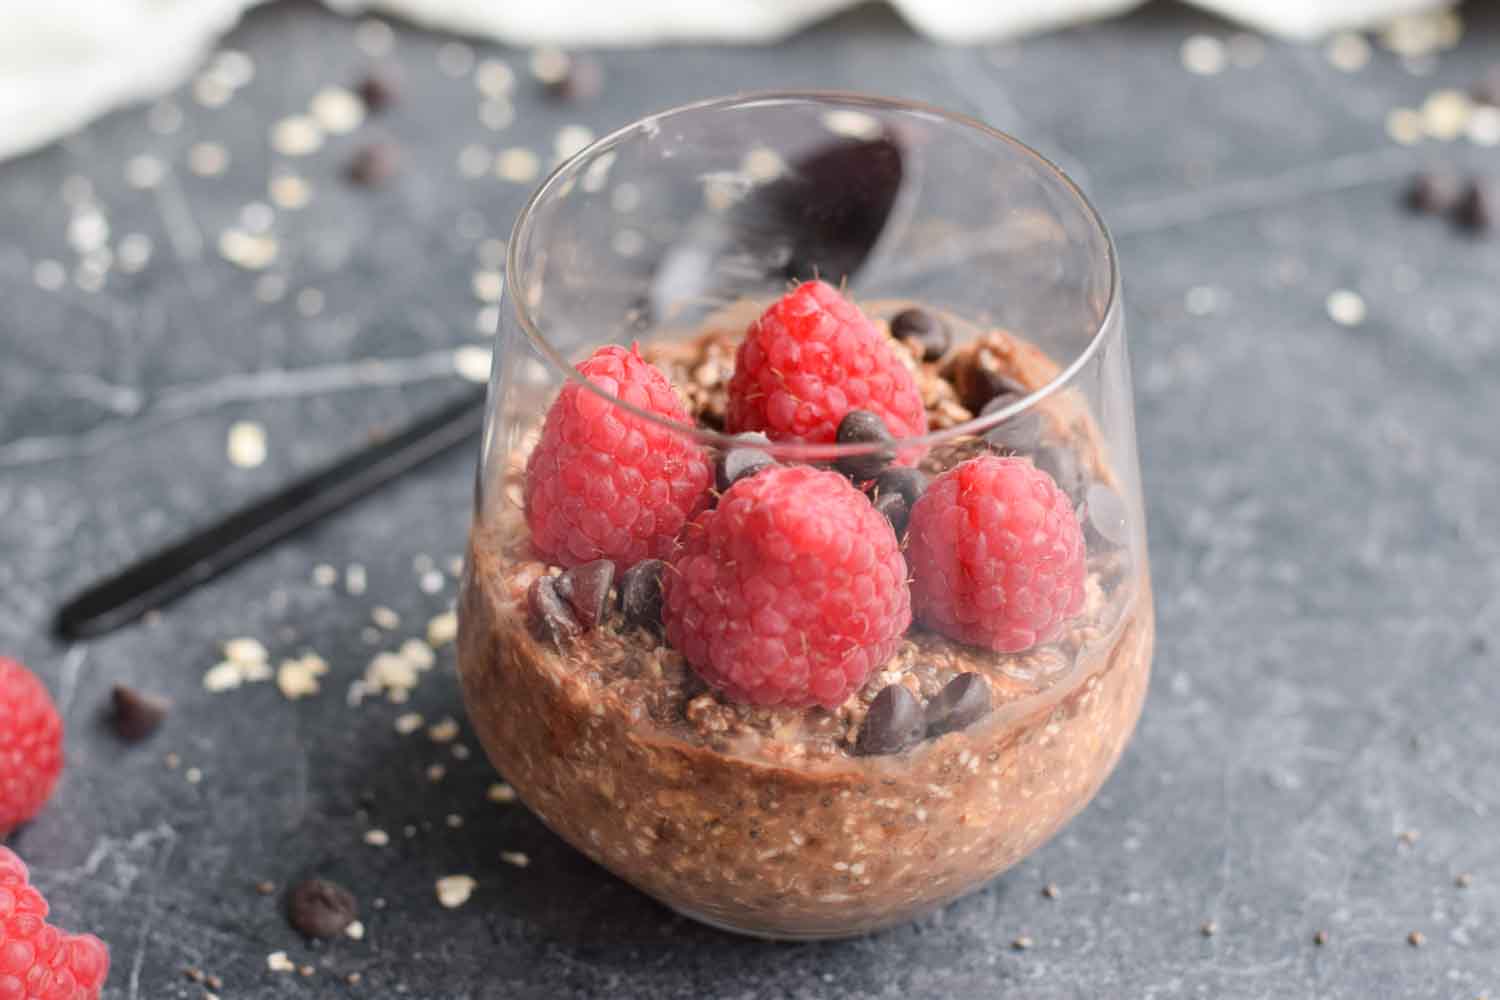 Overnight oats in a glass with raspberries